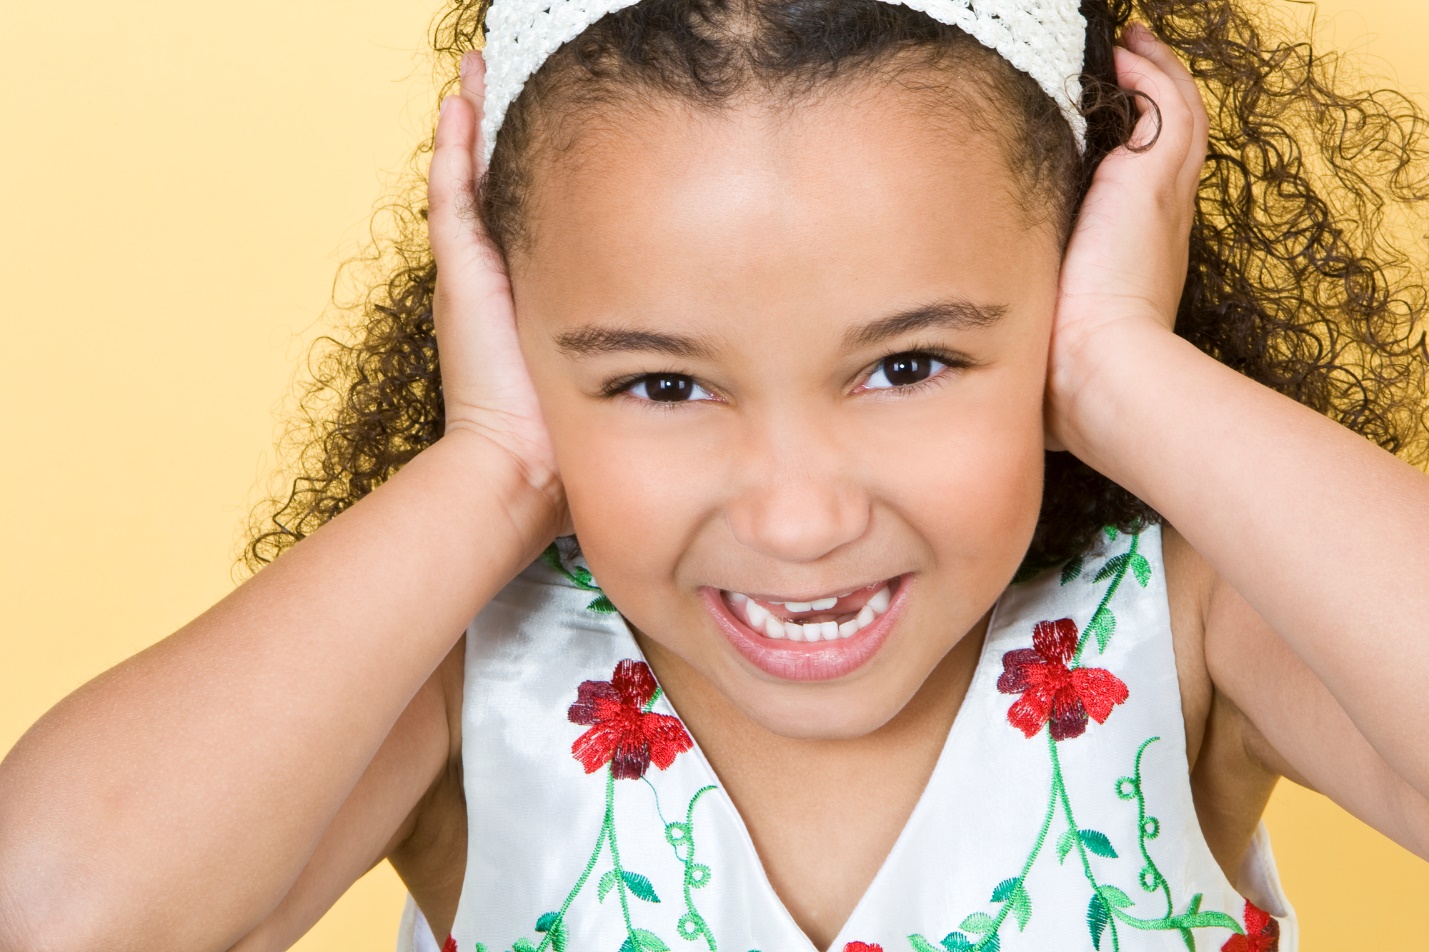 A young child holding her ears

Description automatically generated